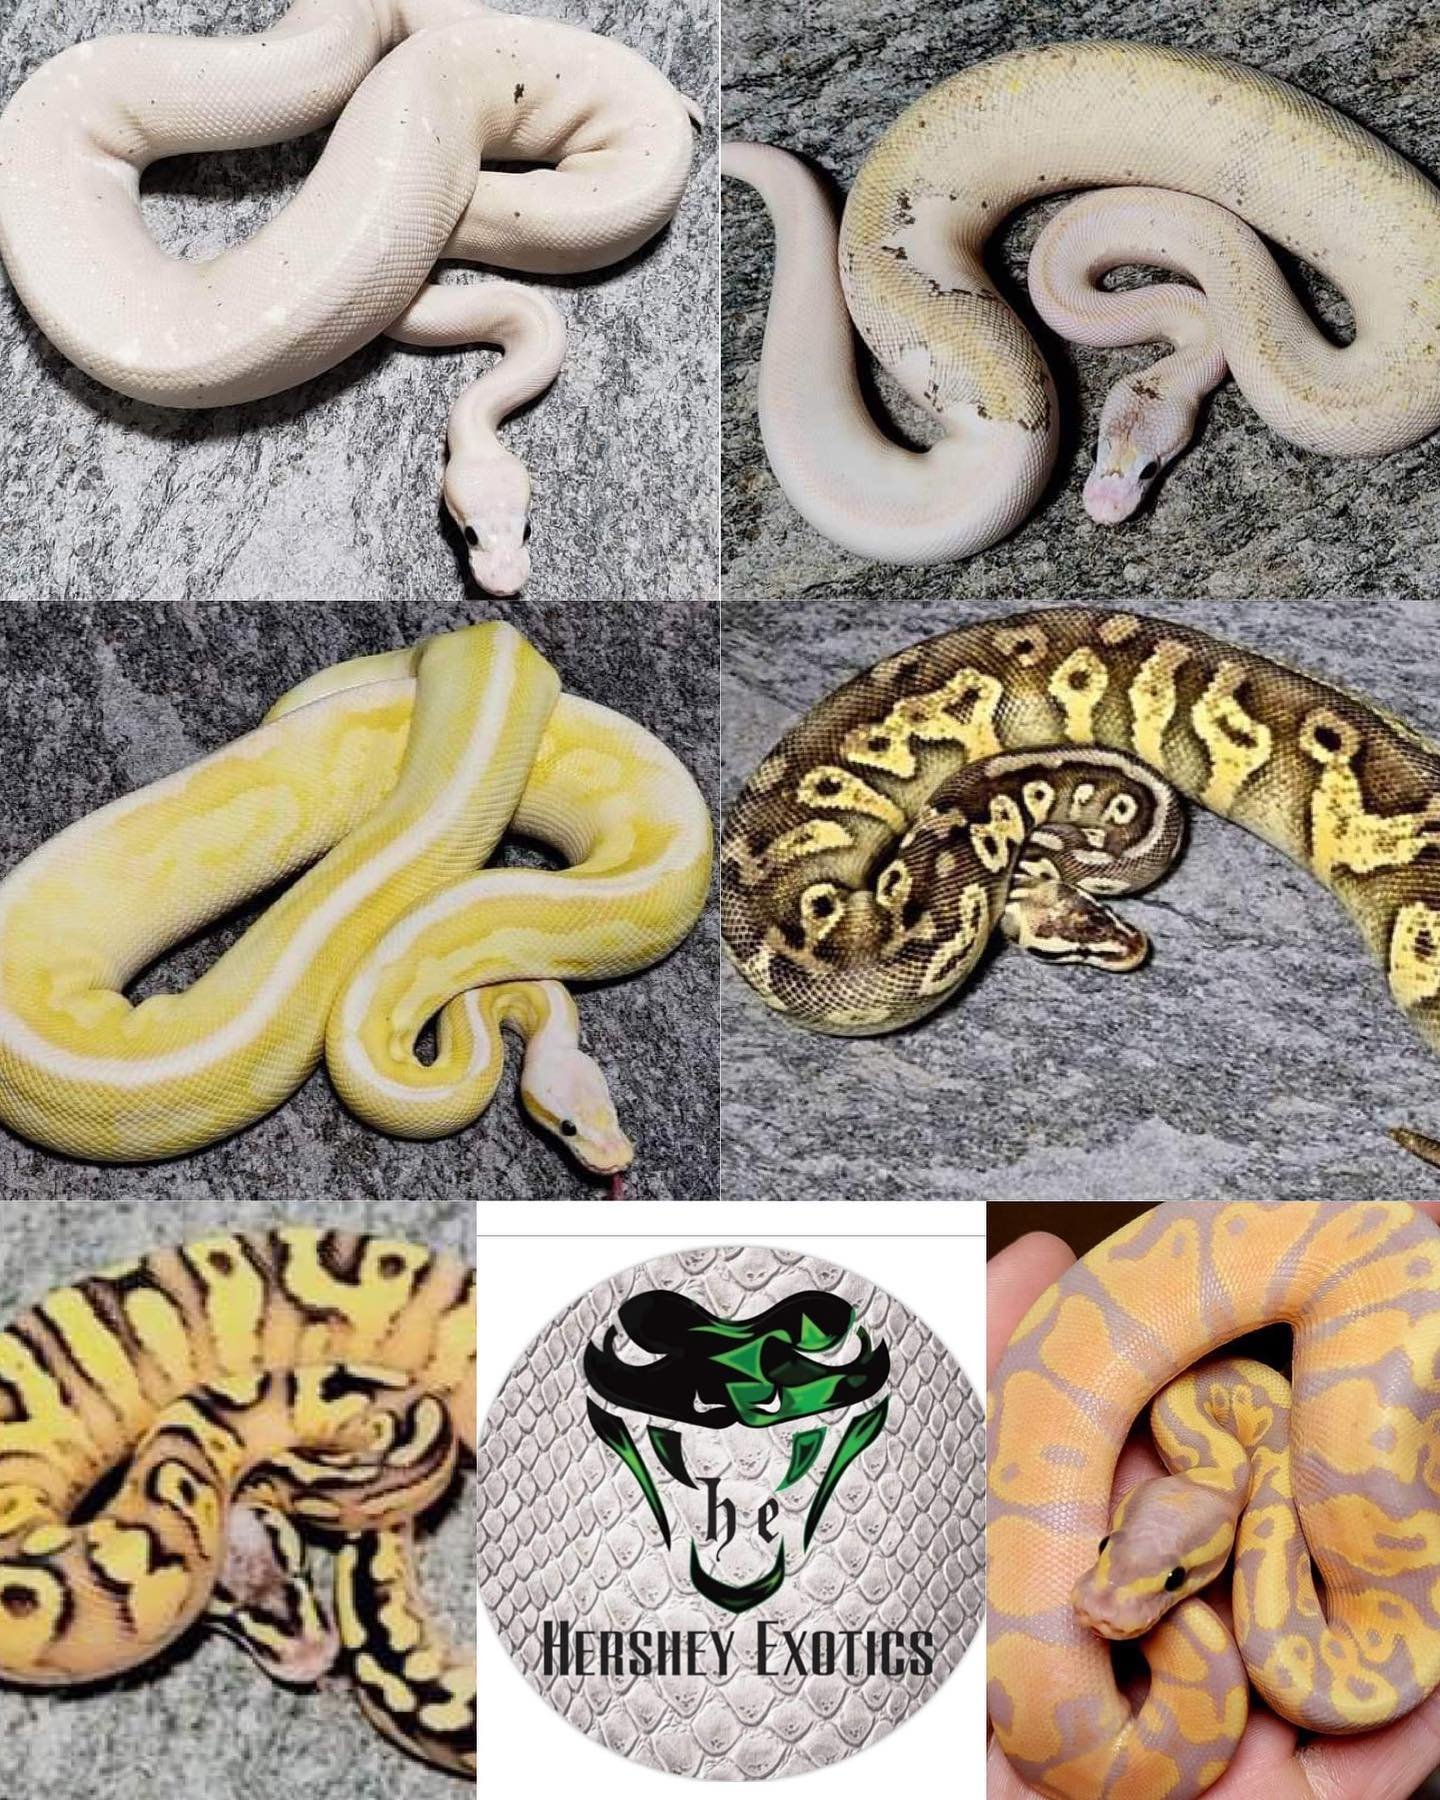 @hersheyexotics will be vending with us on June 2nd! 

They will have a wide variety of beautiful ball pythons to choose from!

Make sure to check them out! #ballpython #ballpythonsofinstagram #snake #snakes #exoticreptiles #exoticreptile #exotic #re